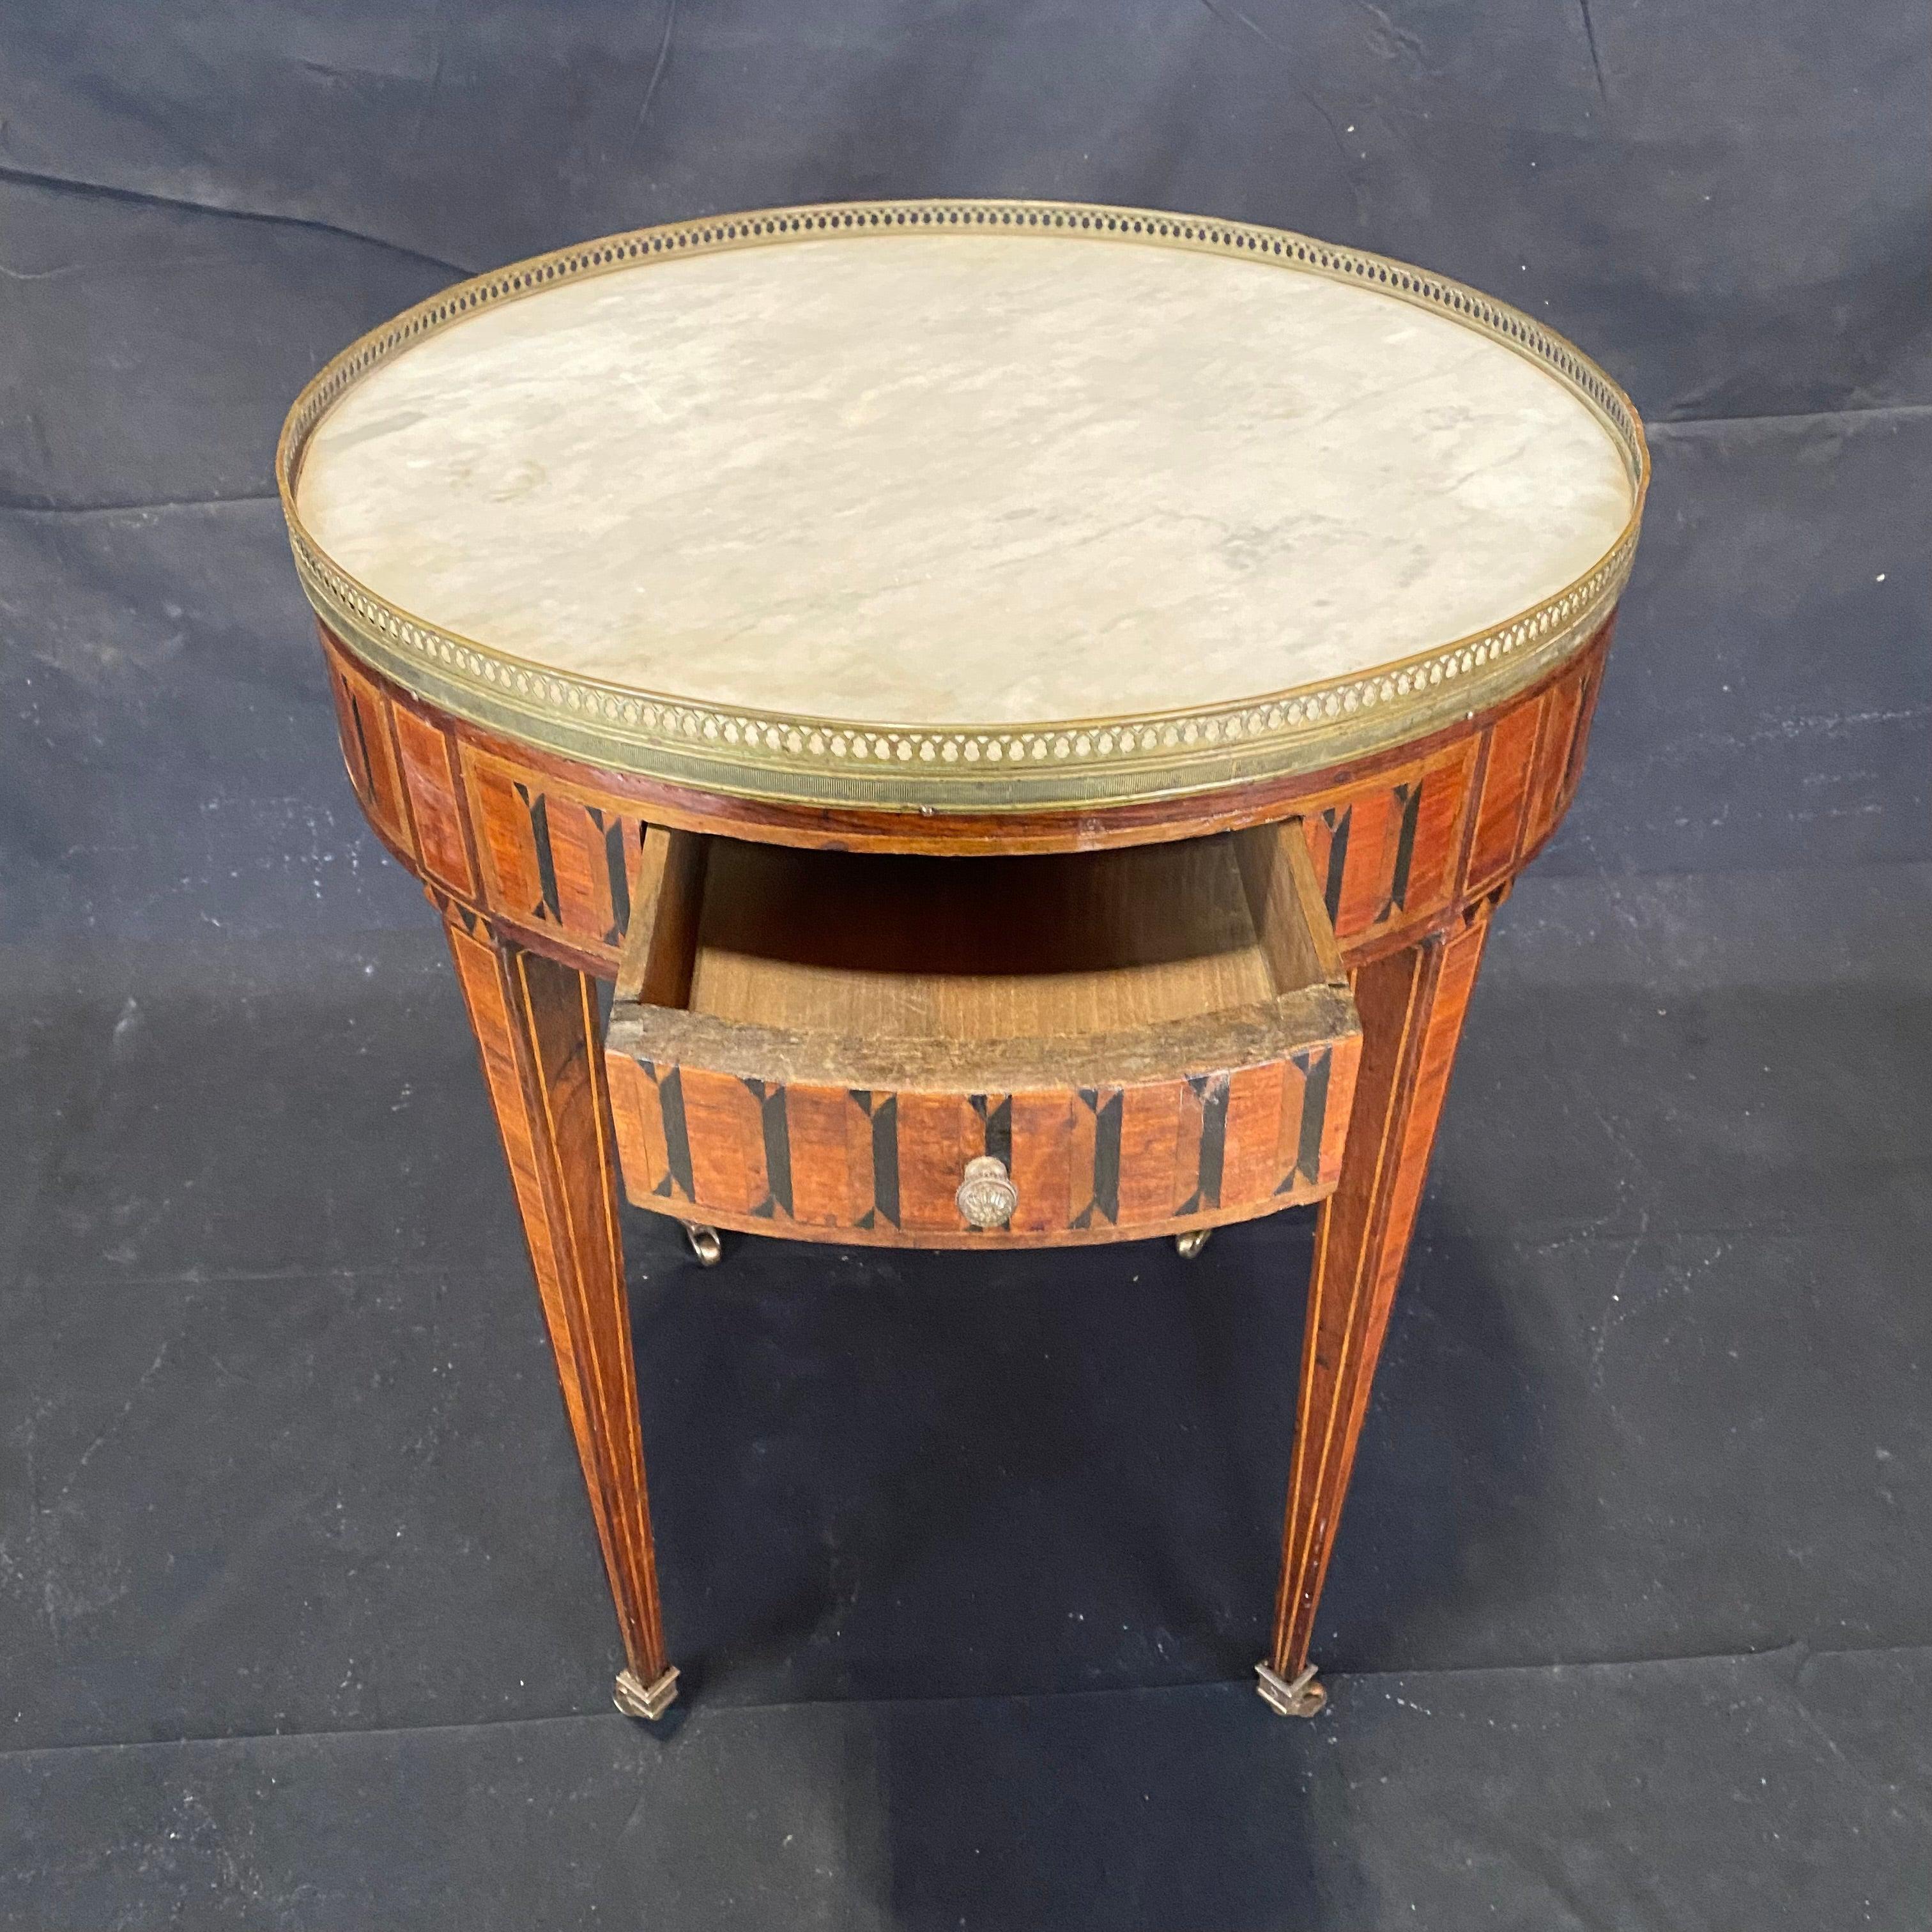 Louis XVI style marble top bouillotte table with elaborate marquetry. Two drawers and pull out tirelles slides with red tooled leather. White Carrera marble top is surrounded by a pierced bronze gallery. Marble has small chip (see photos). The table